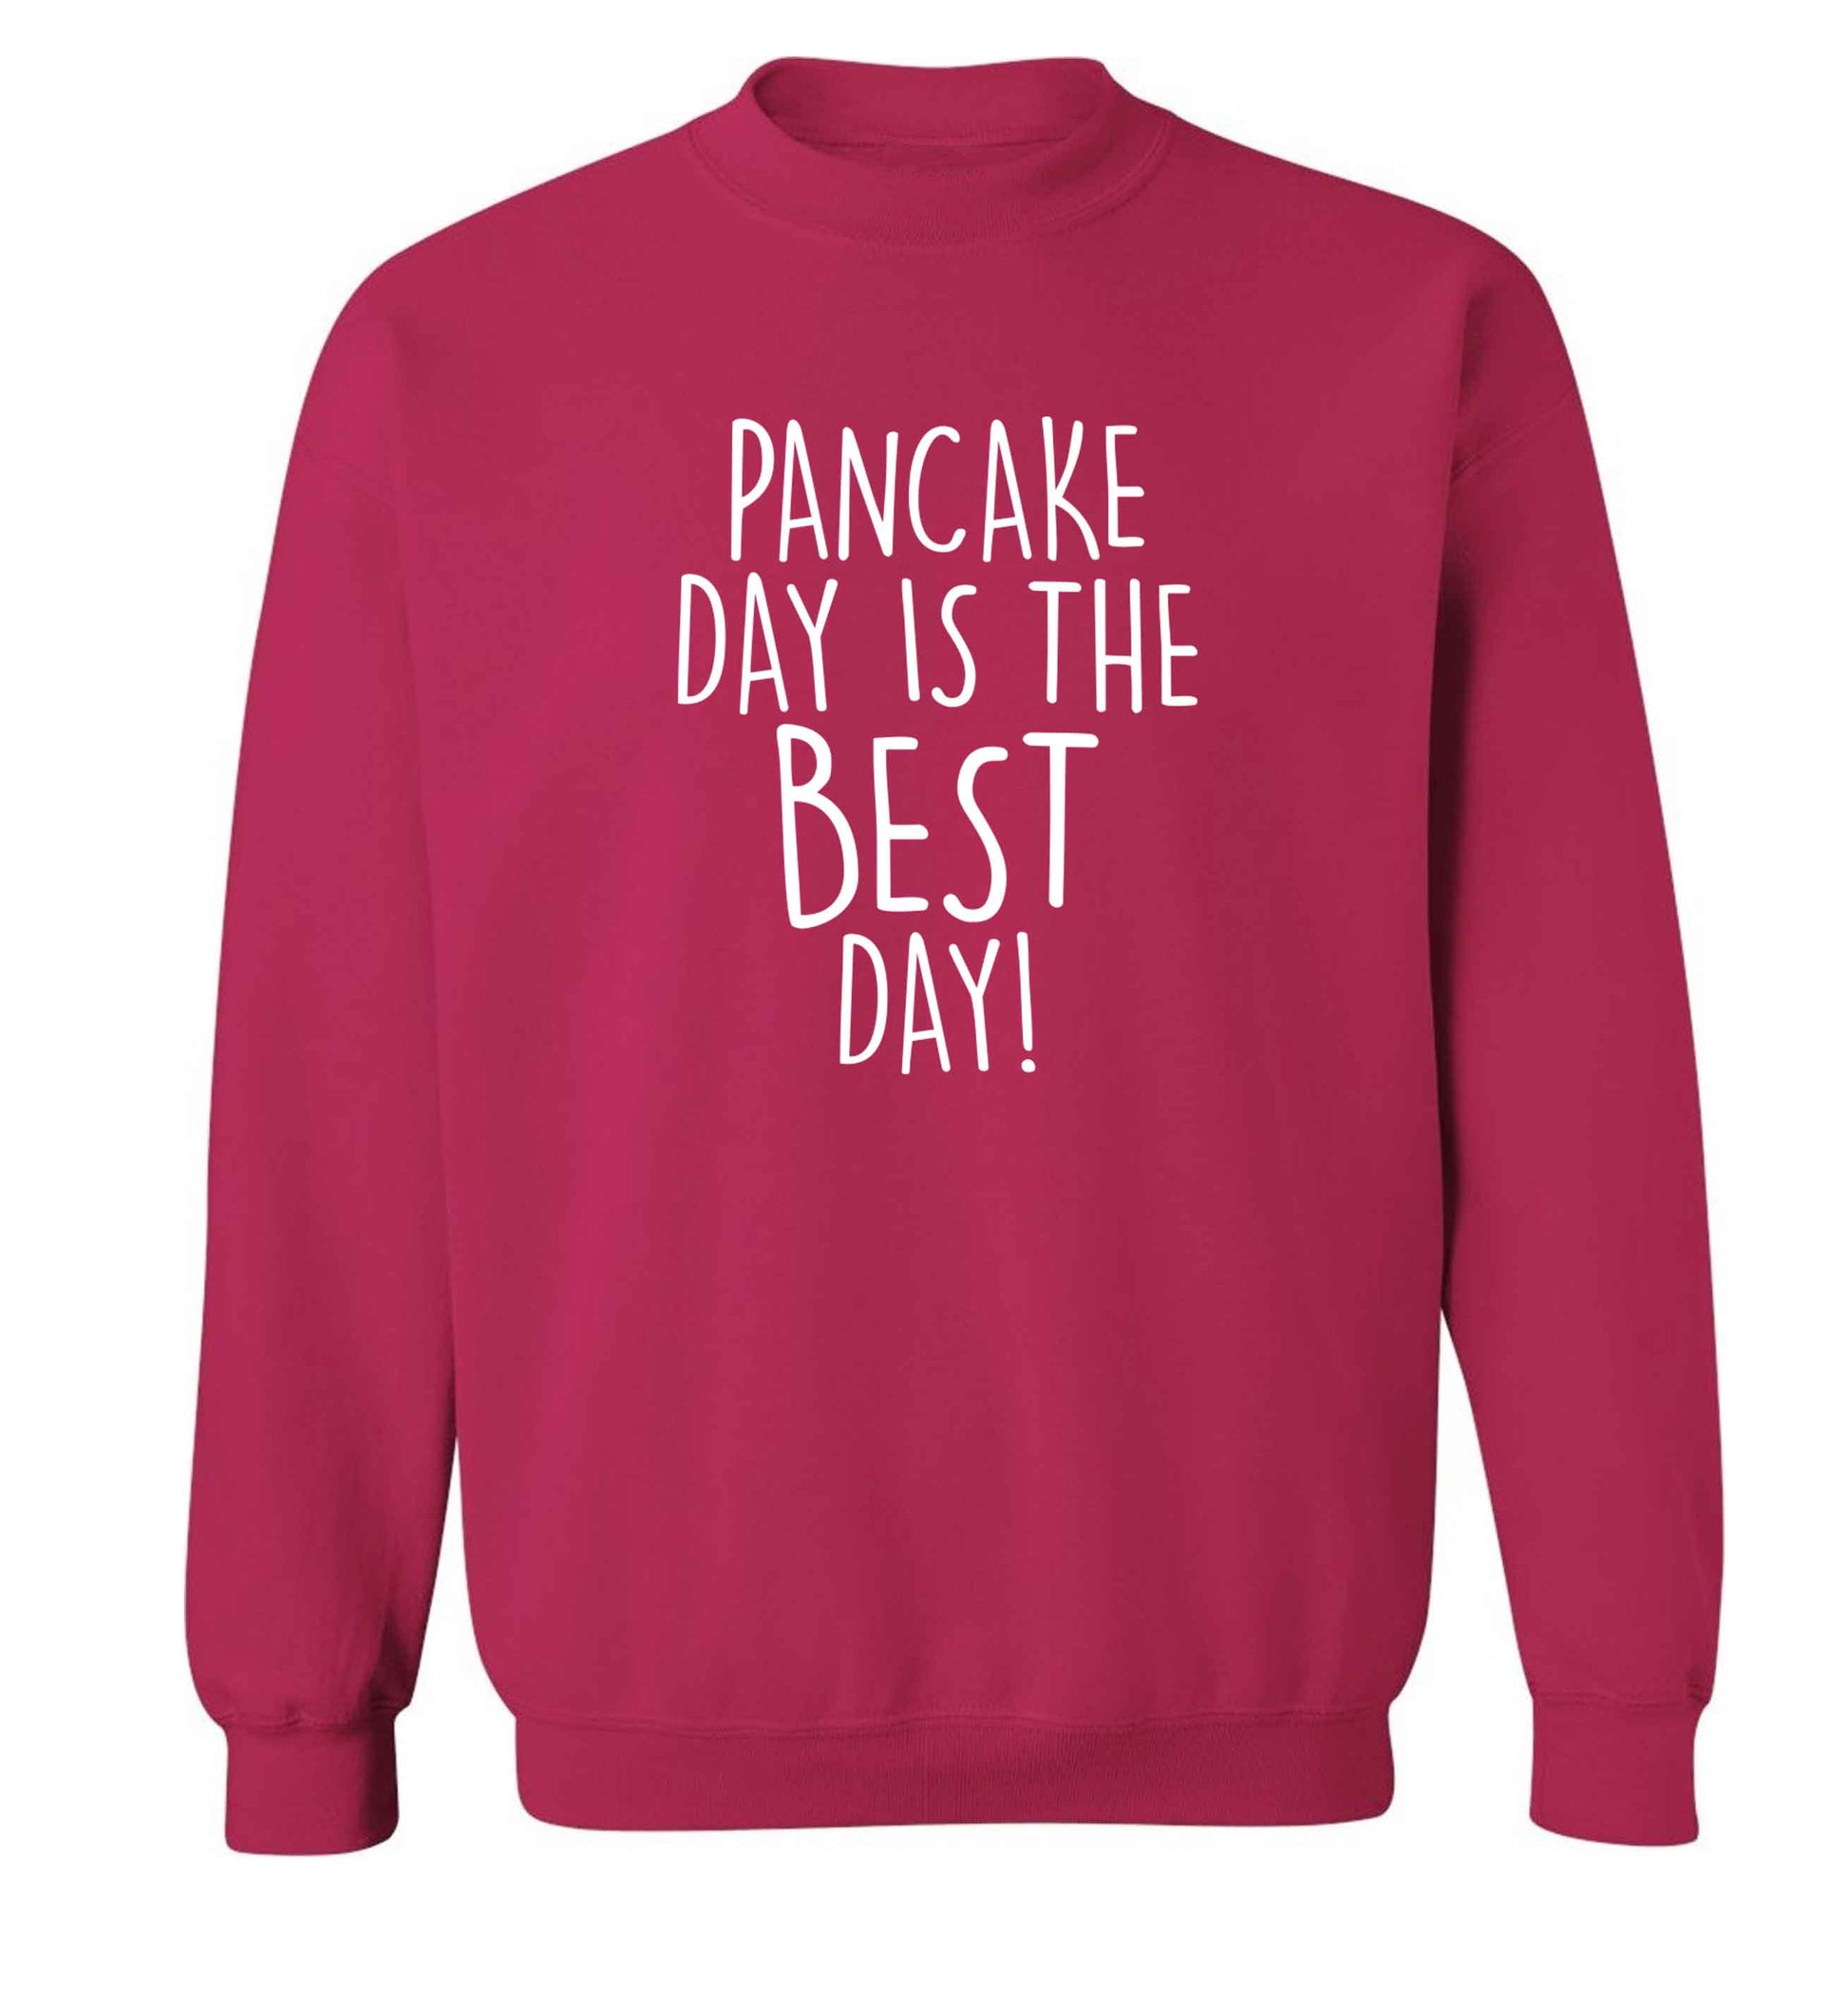 Pancake day is the best day adult's unisex pink sweater 2XL